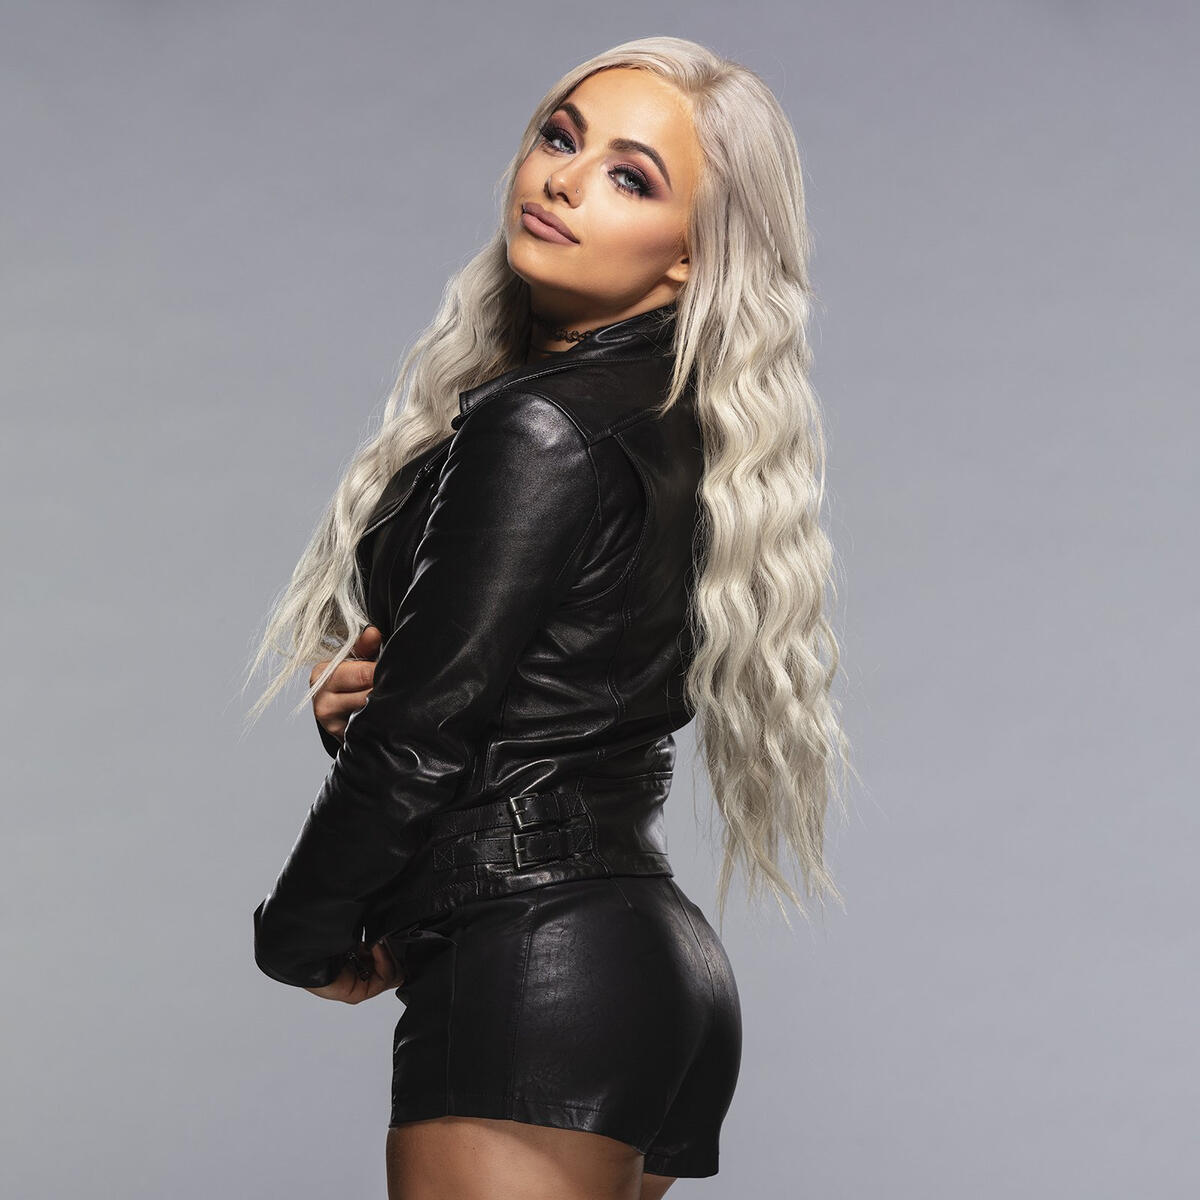 Wwe Reveals Liv Morgan Photo Shoot With New Ring Attire